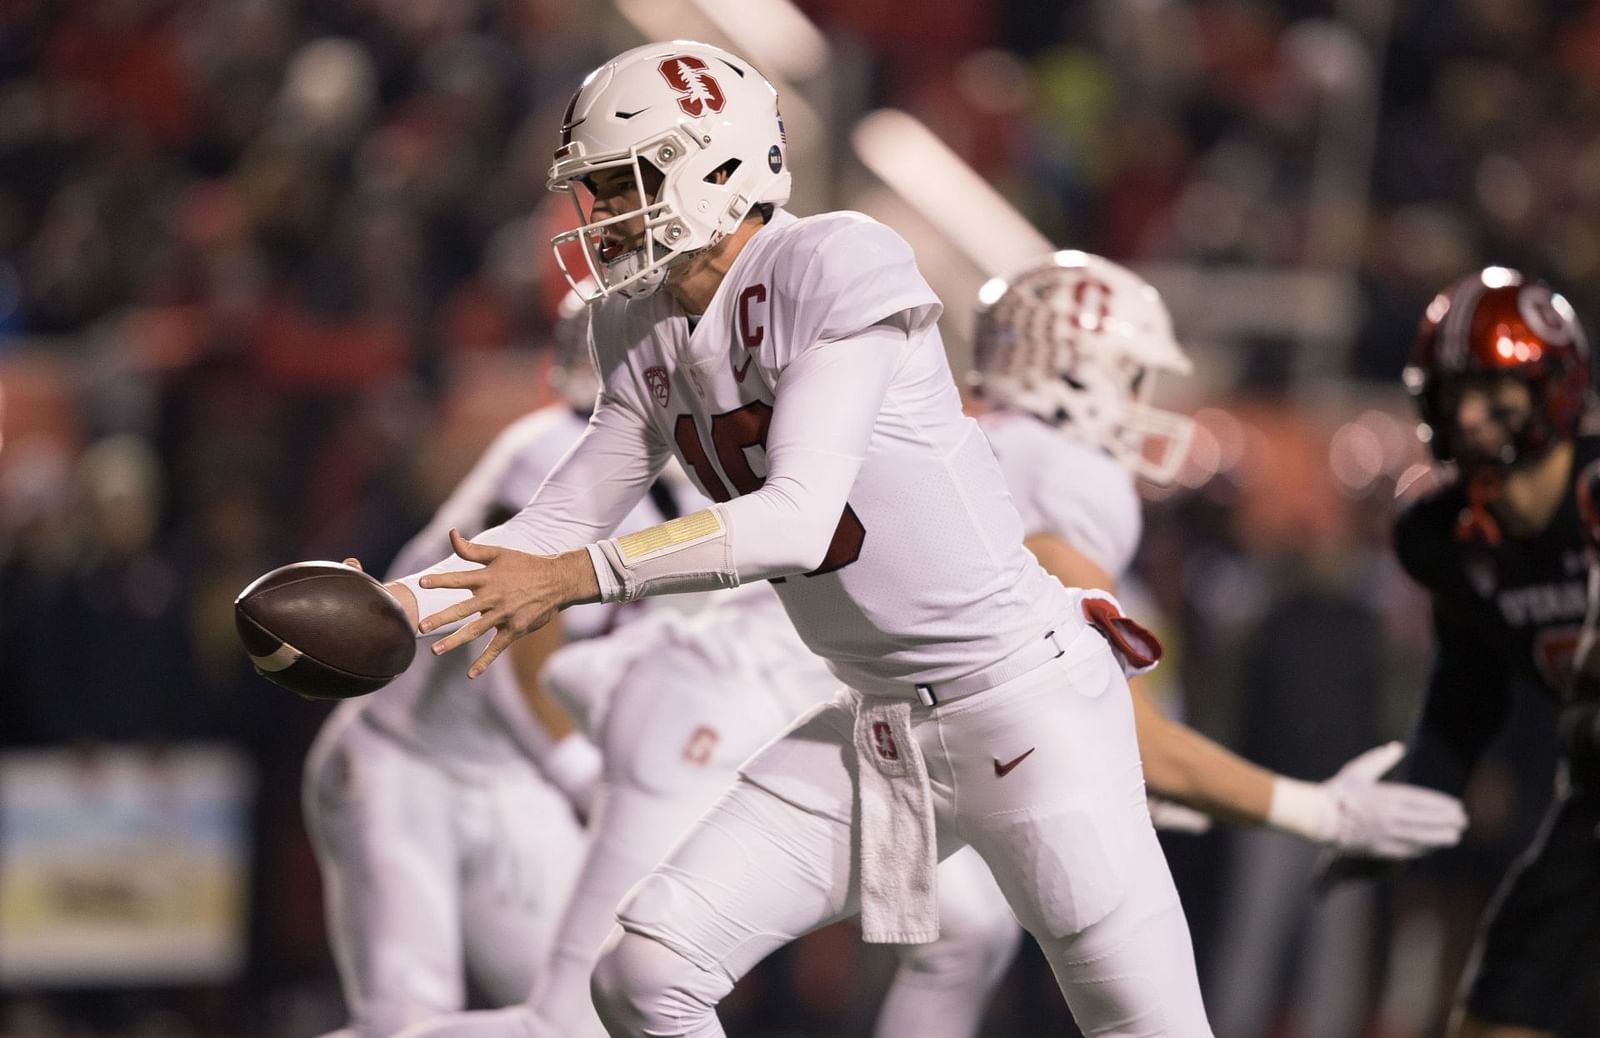 Tanner Mckee 2023 Nfl Draft Profile Scout Report For The Stanford Qb 